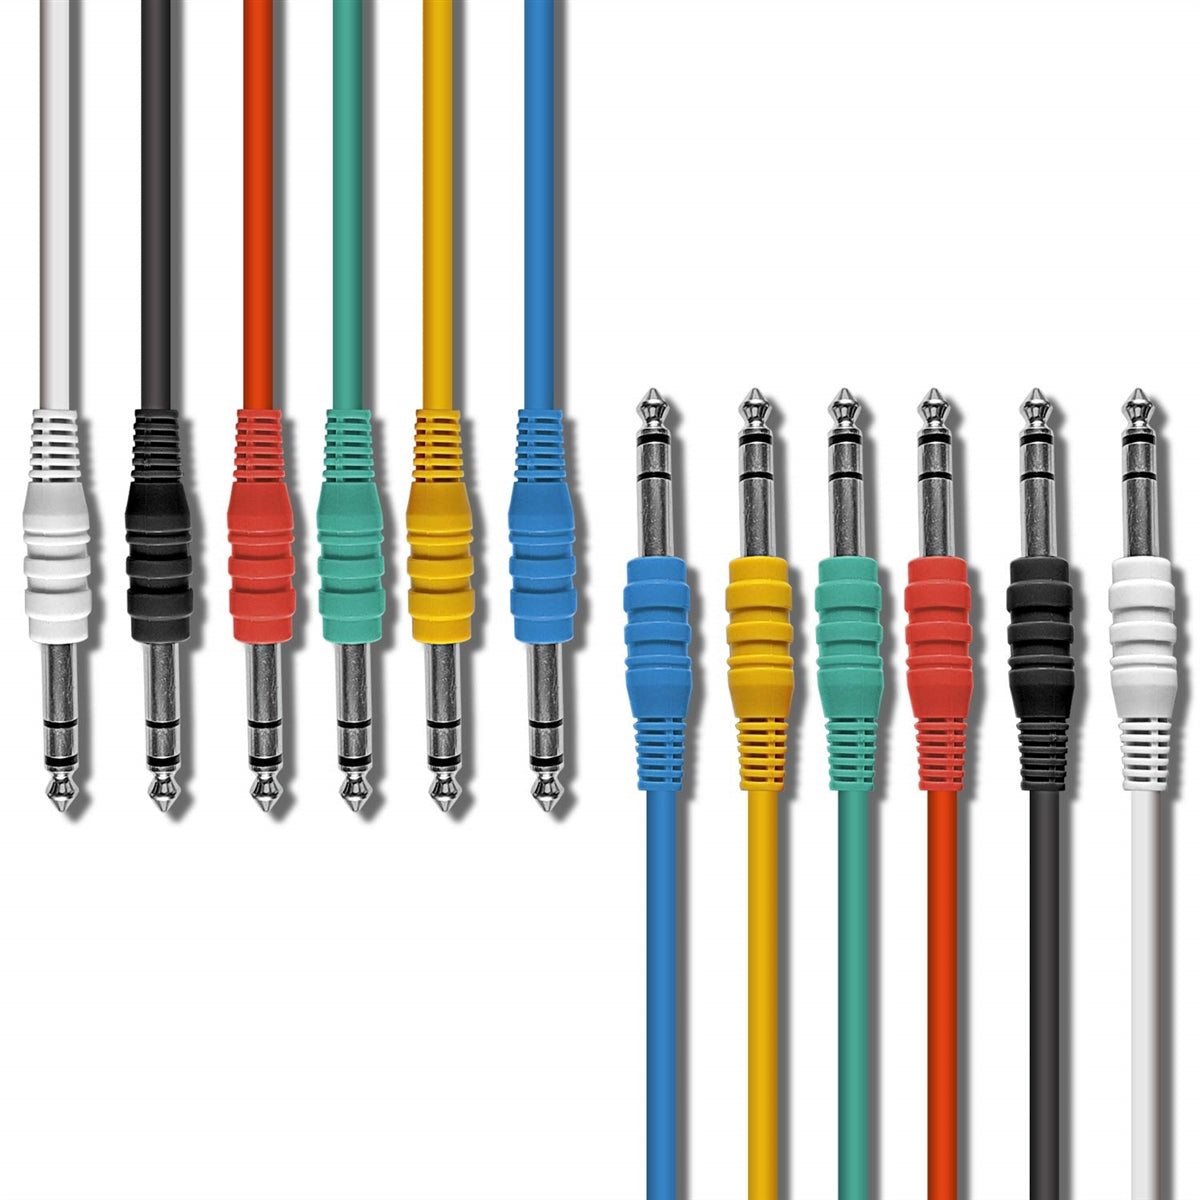 AxcessAbles 1/4-inch (6.35mm)TRS to 1/4-inch (6.35mm) TRS Multi-Color Balanced Stereo Patch Cables 6-Pack Outboard Gear & Patchbay Studio Cables External Effects Digital Analog Effects (1ft)